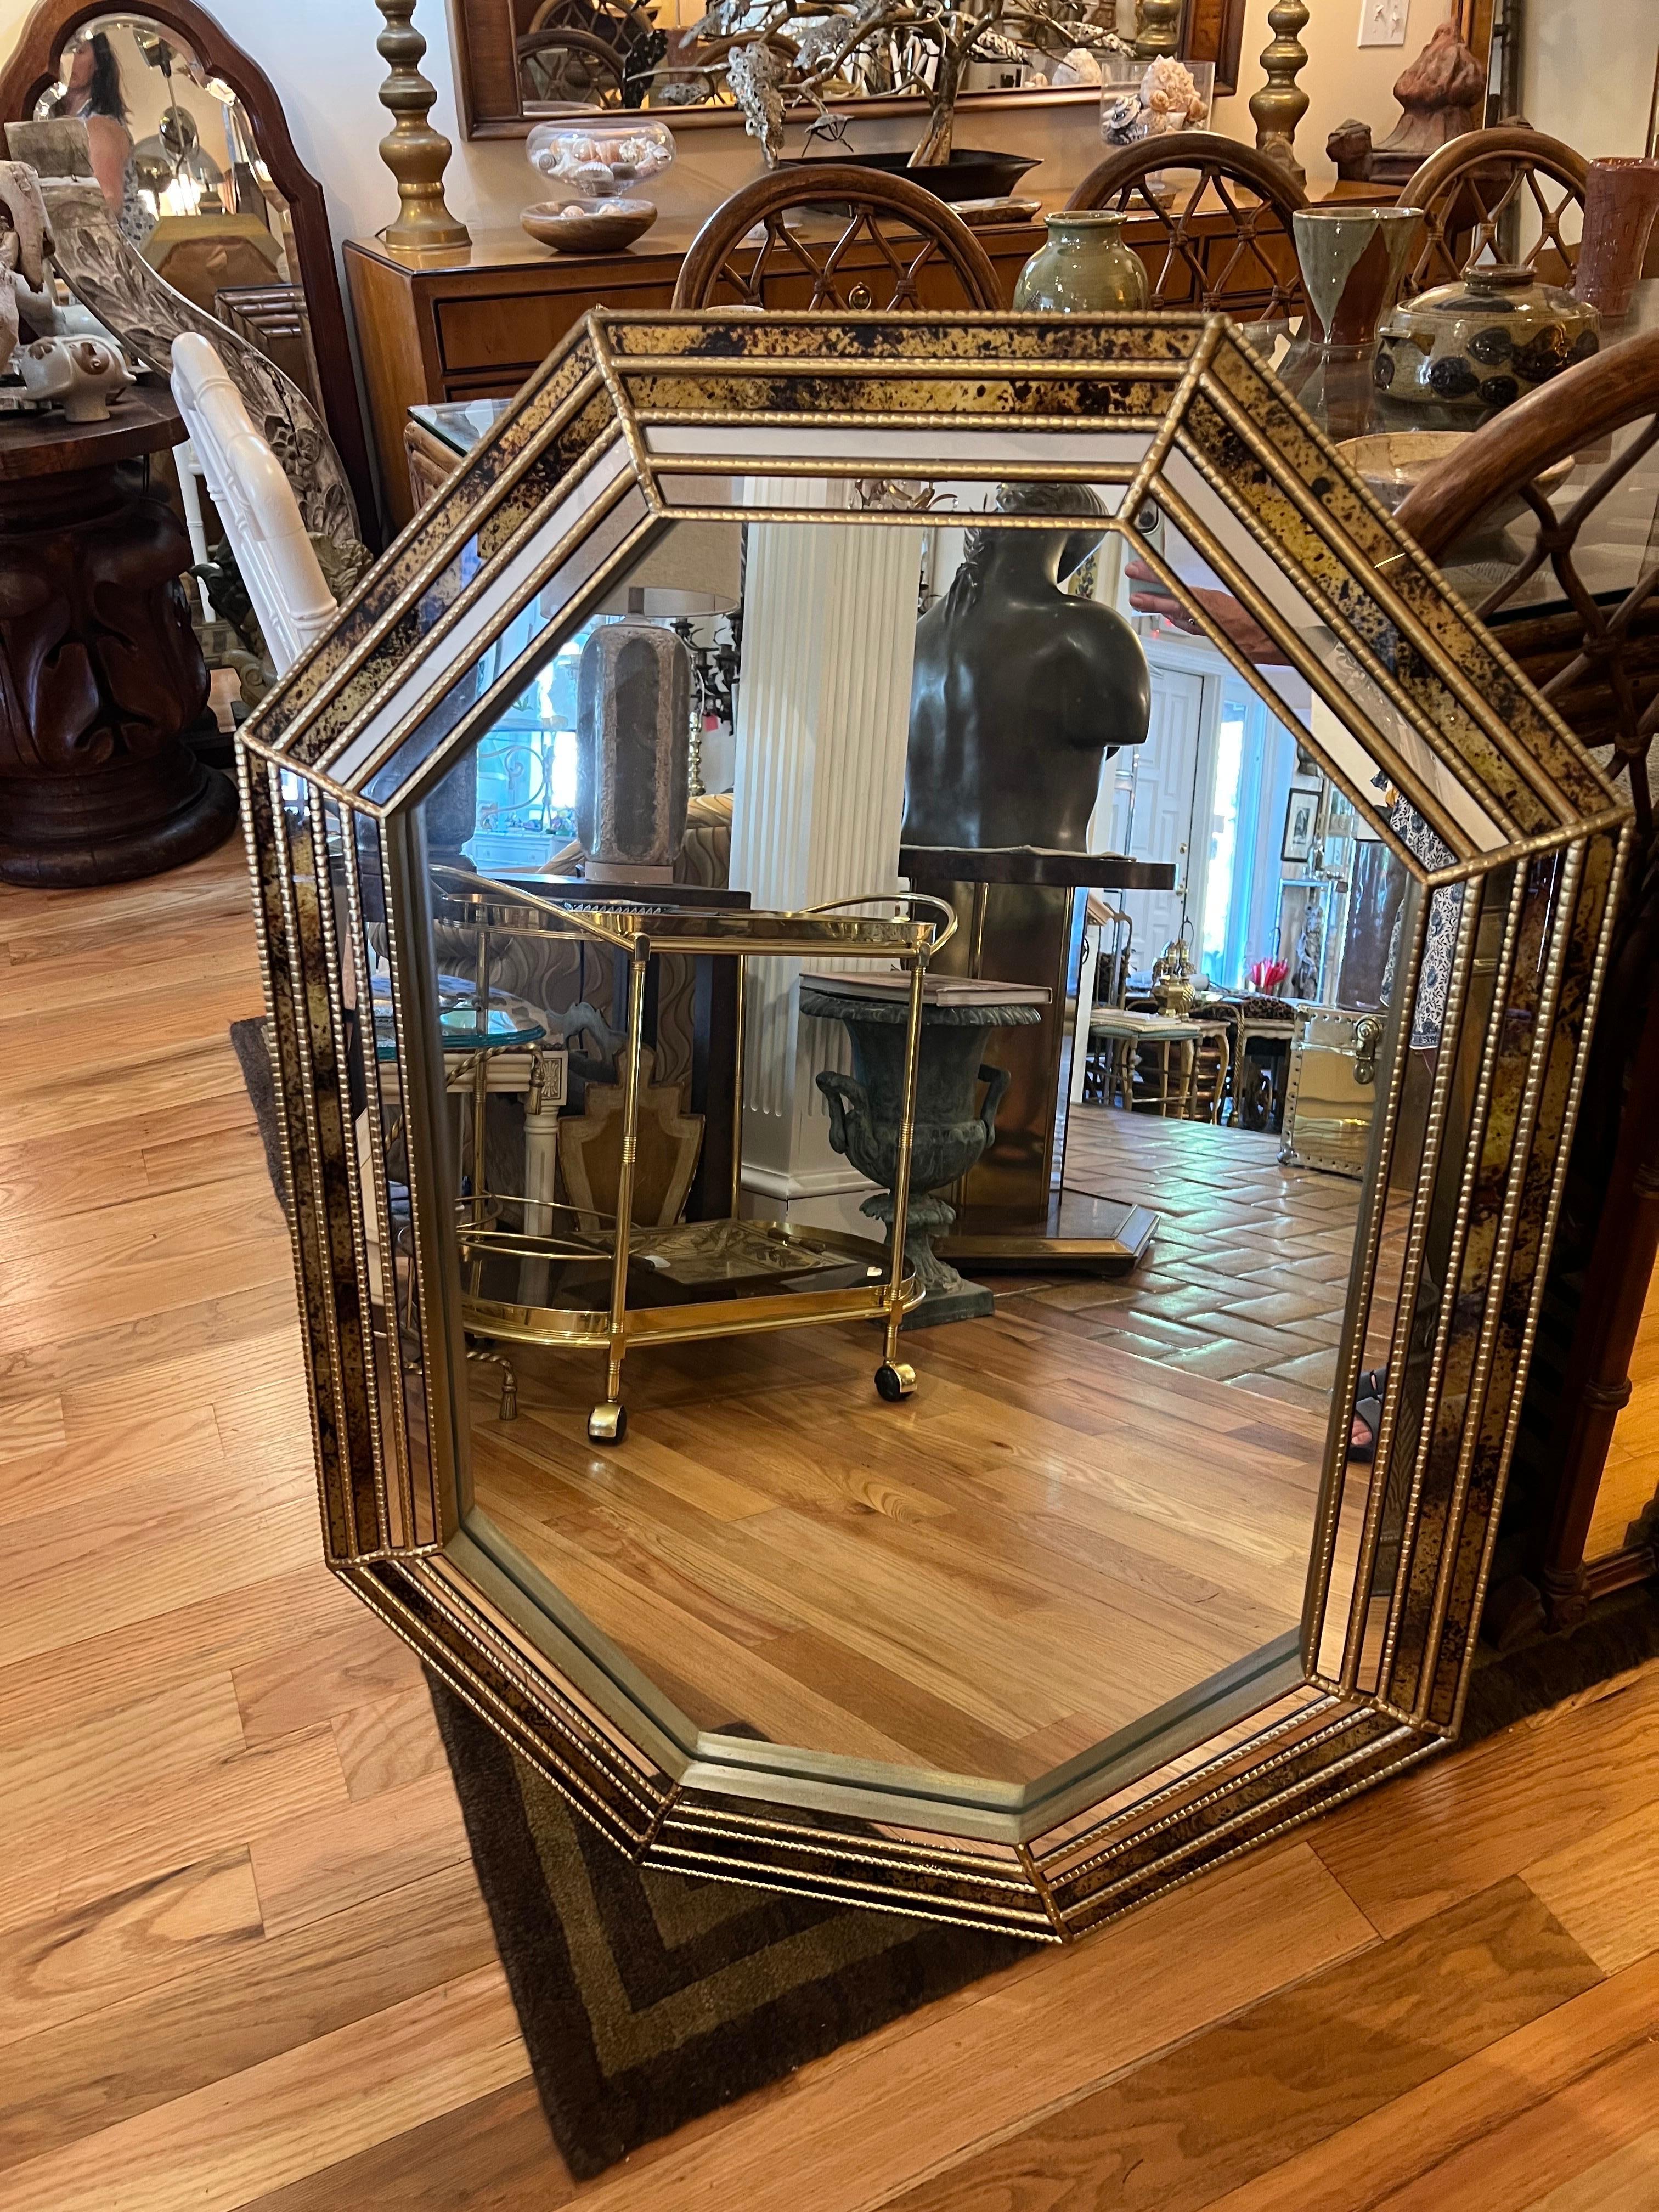 Octagonal Tortoiseshell mirror attributed to LaBarge. Nice beveled mirror with four spiderweb style outer rings with tortoiseshell oil drip panels which give it a nice depth.